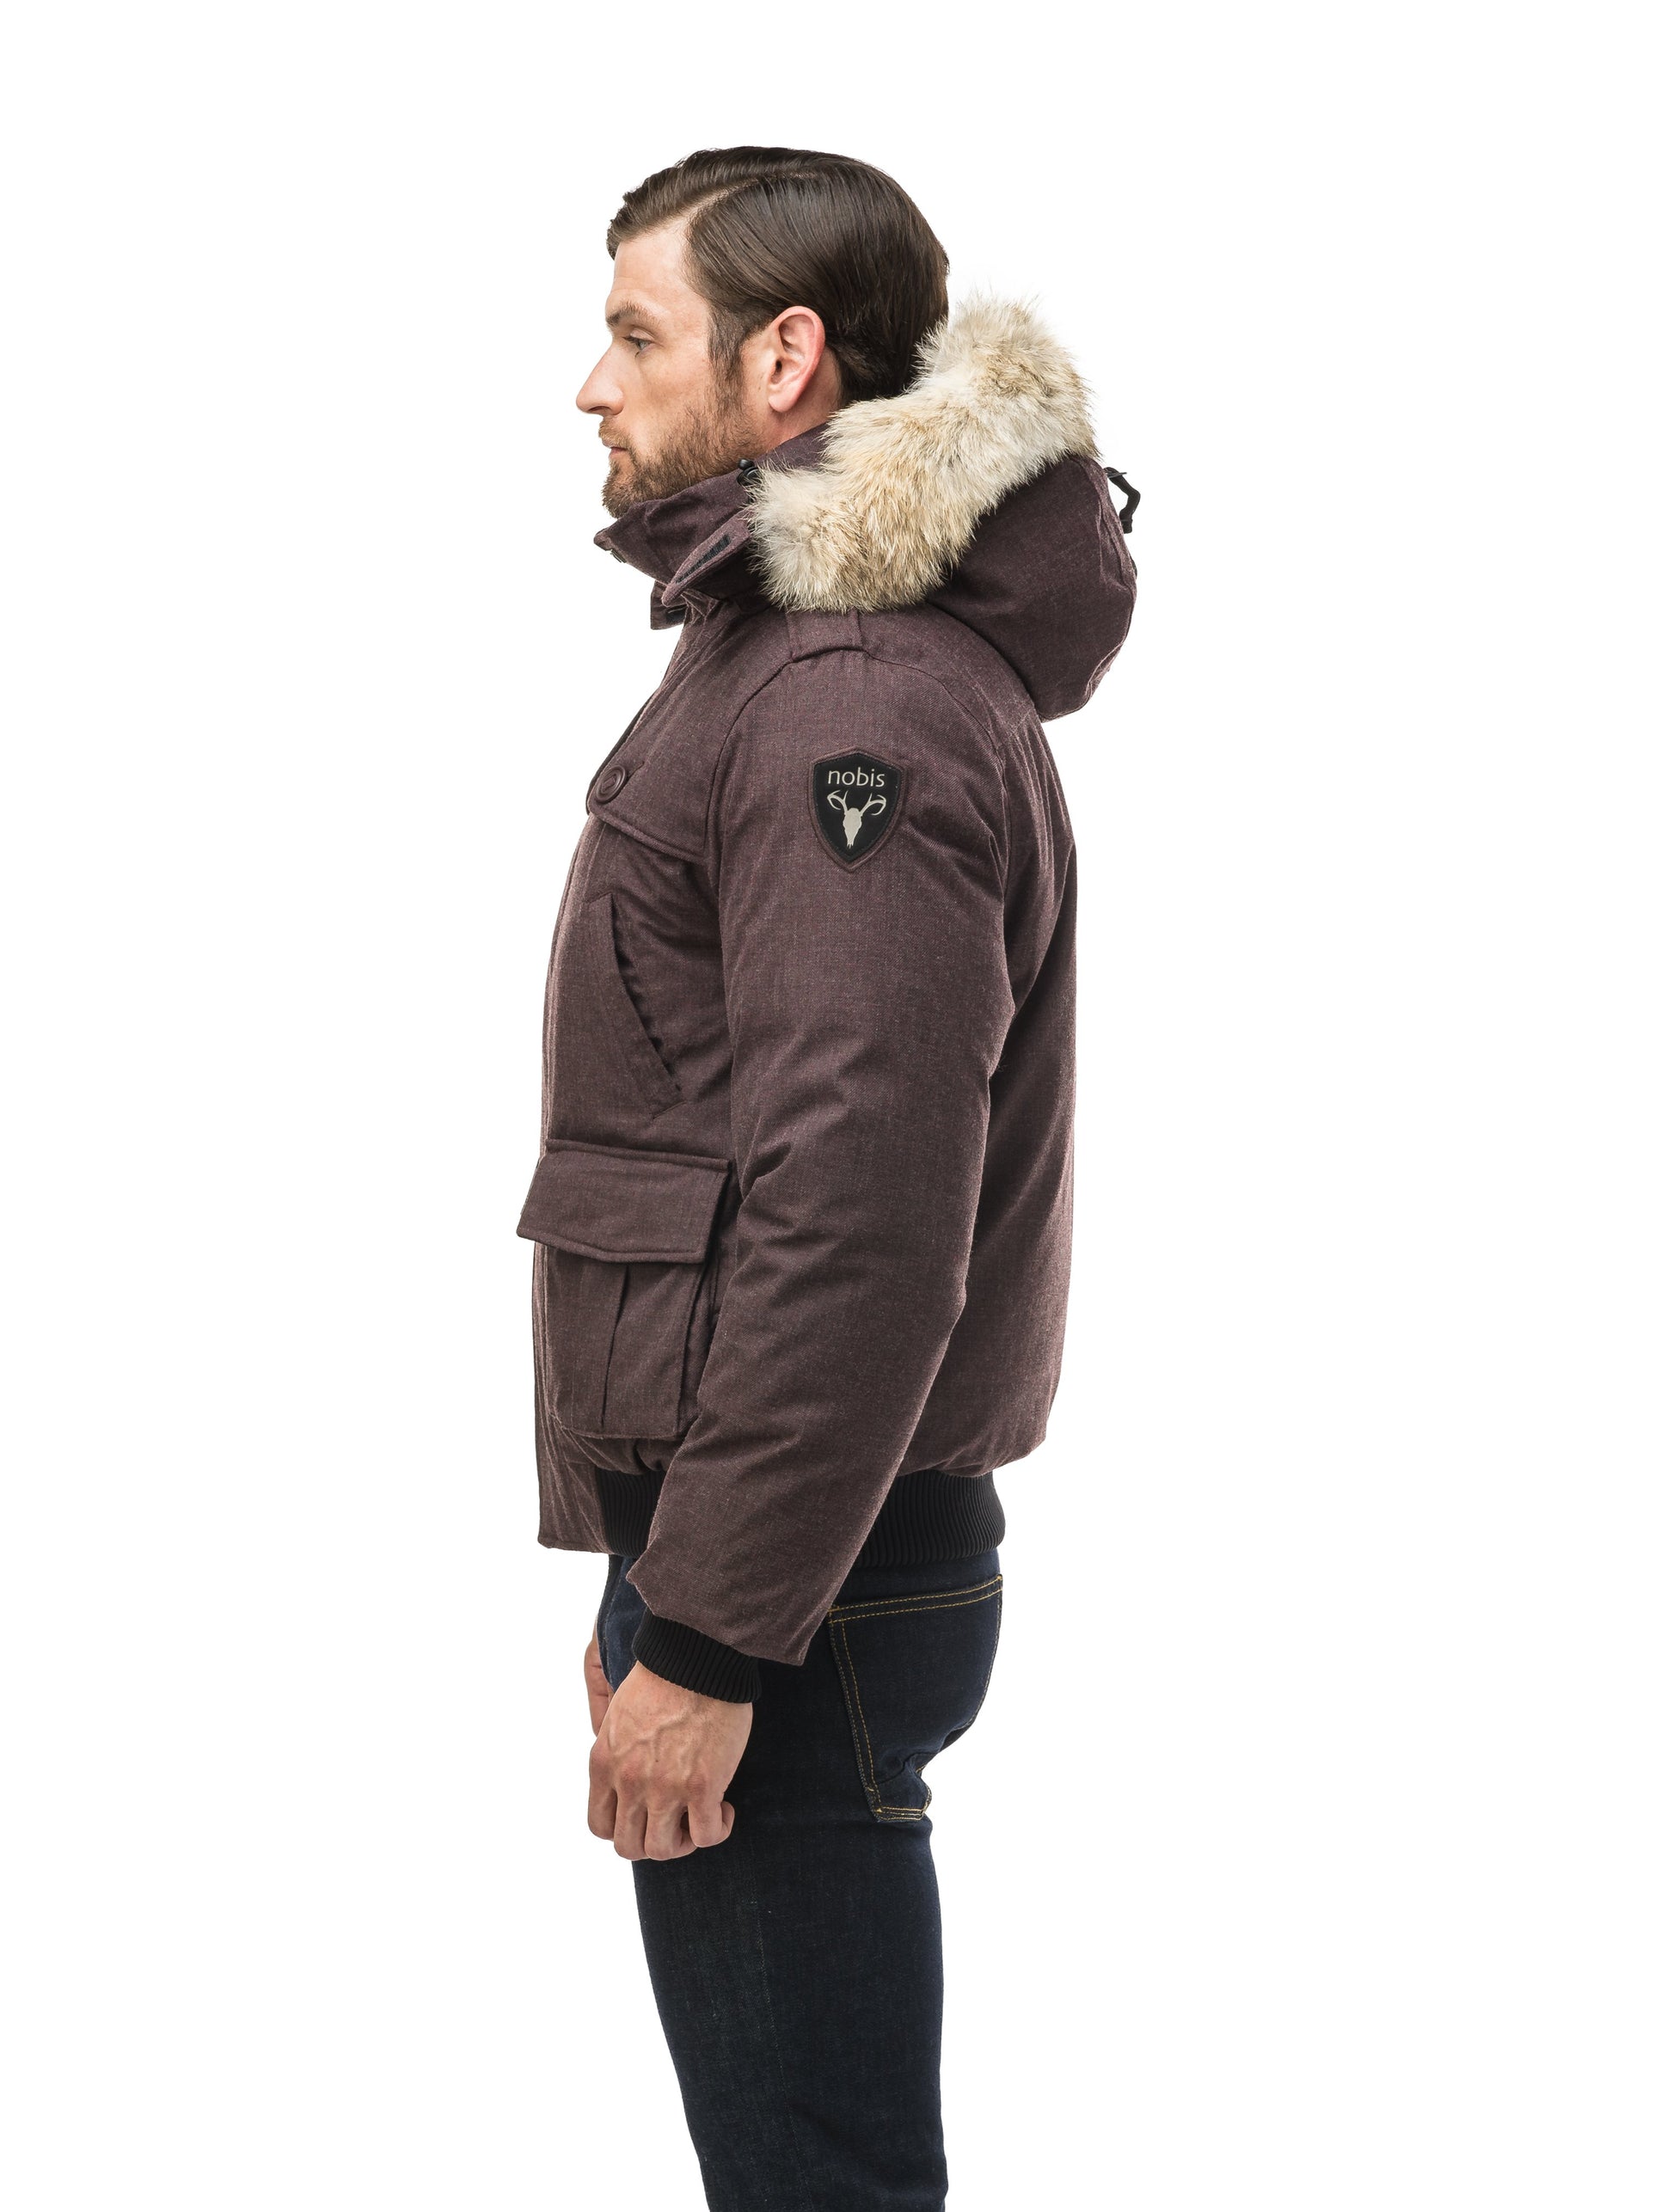 Men's down filled bomber that sits just above the hips with a completely removable hood that's windproof, waterproof, and breathable in H. Burgundy